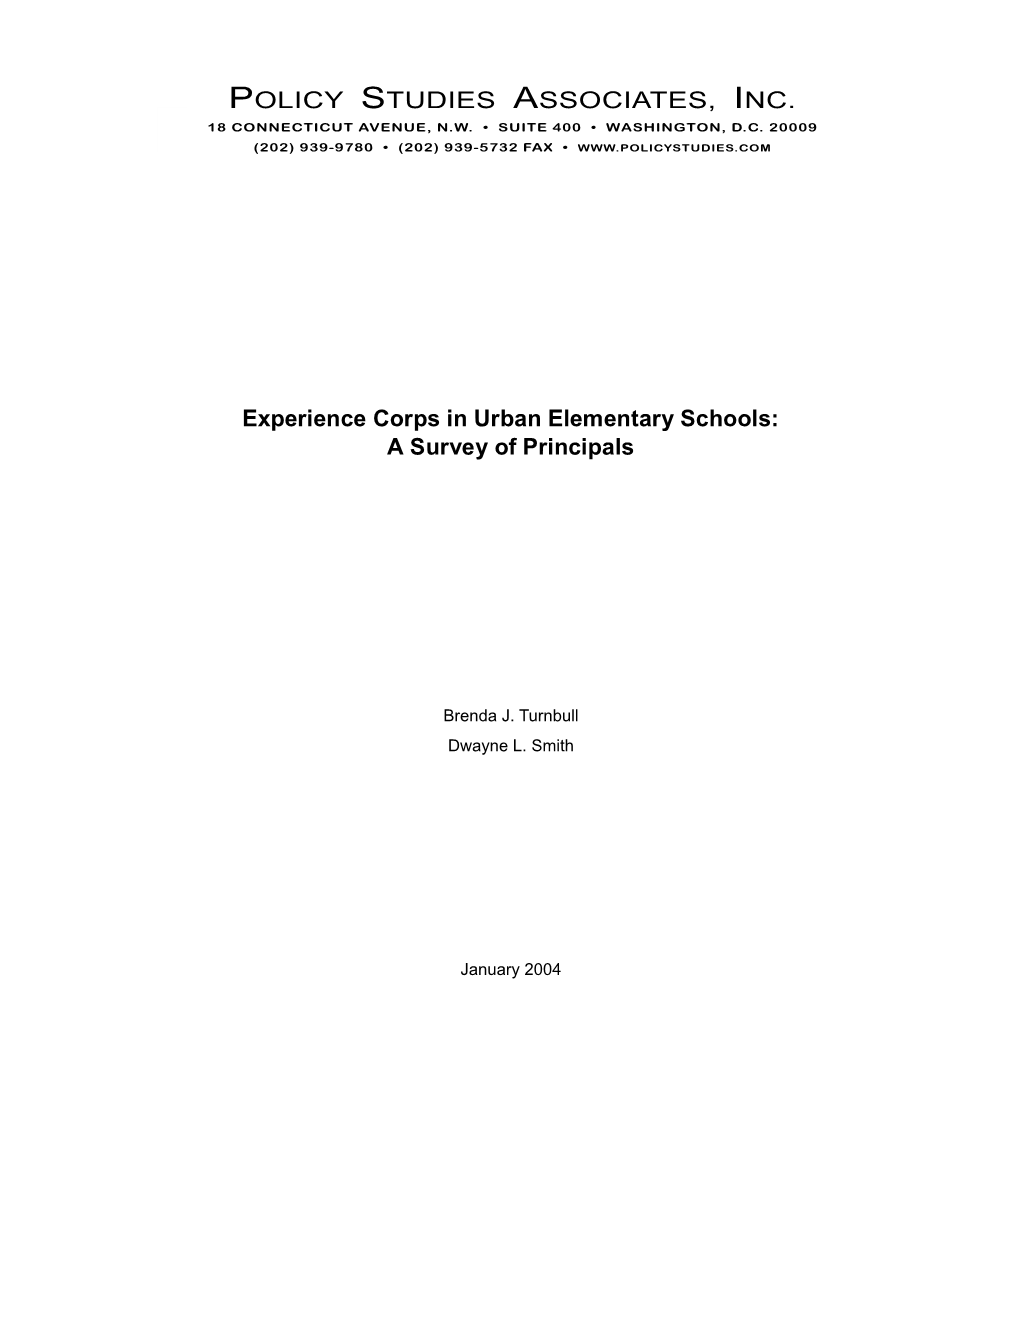 Experience Corps in Urban Elementary Schools-A Survey Of